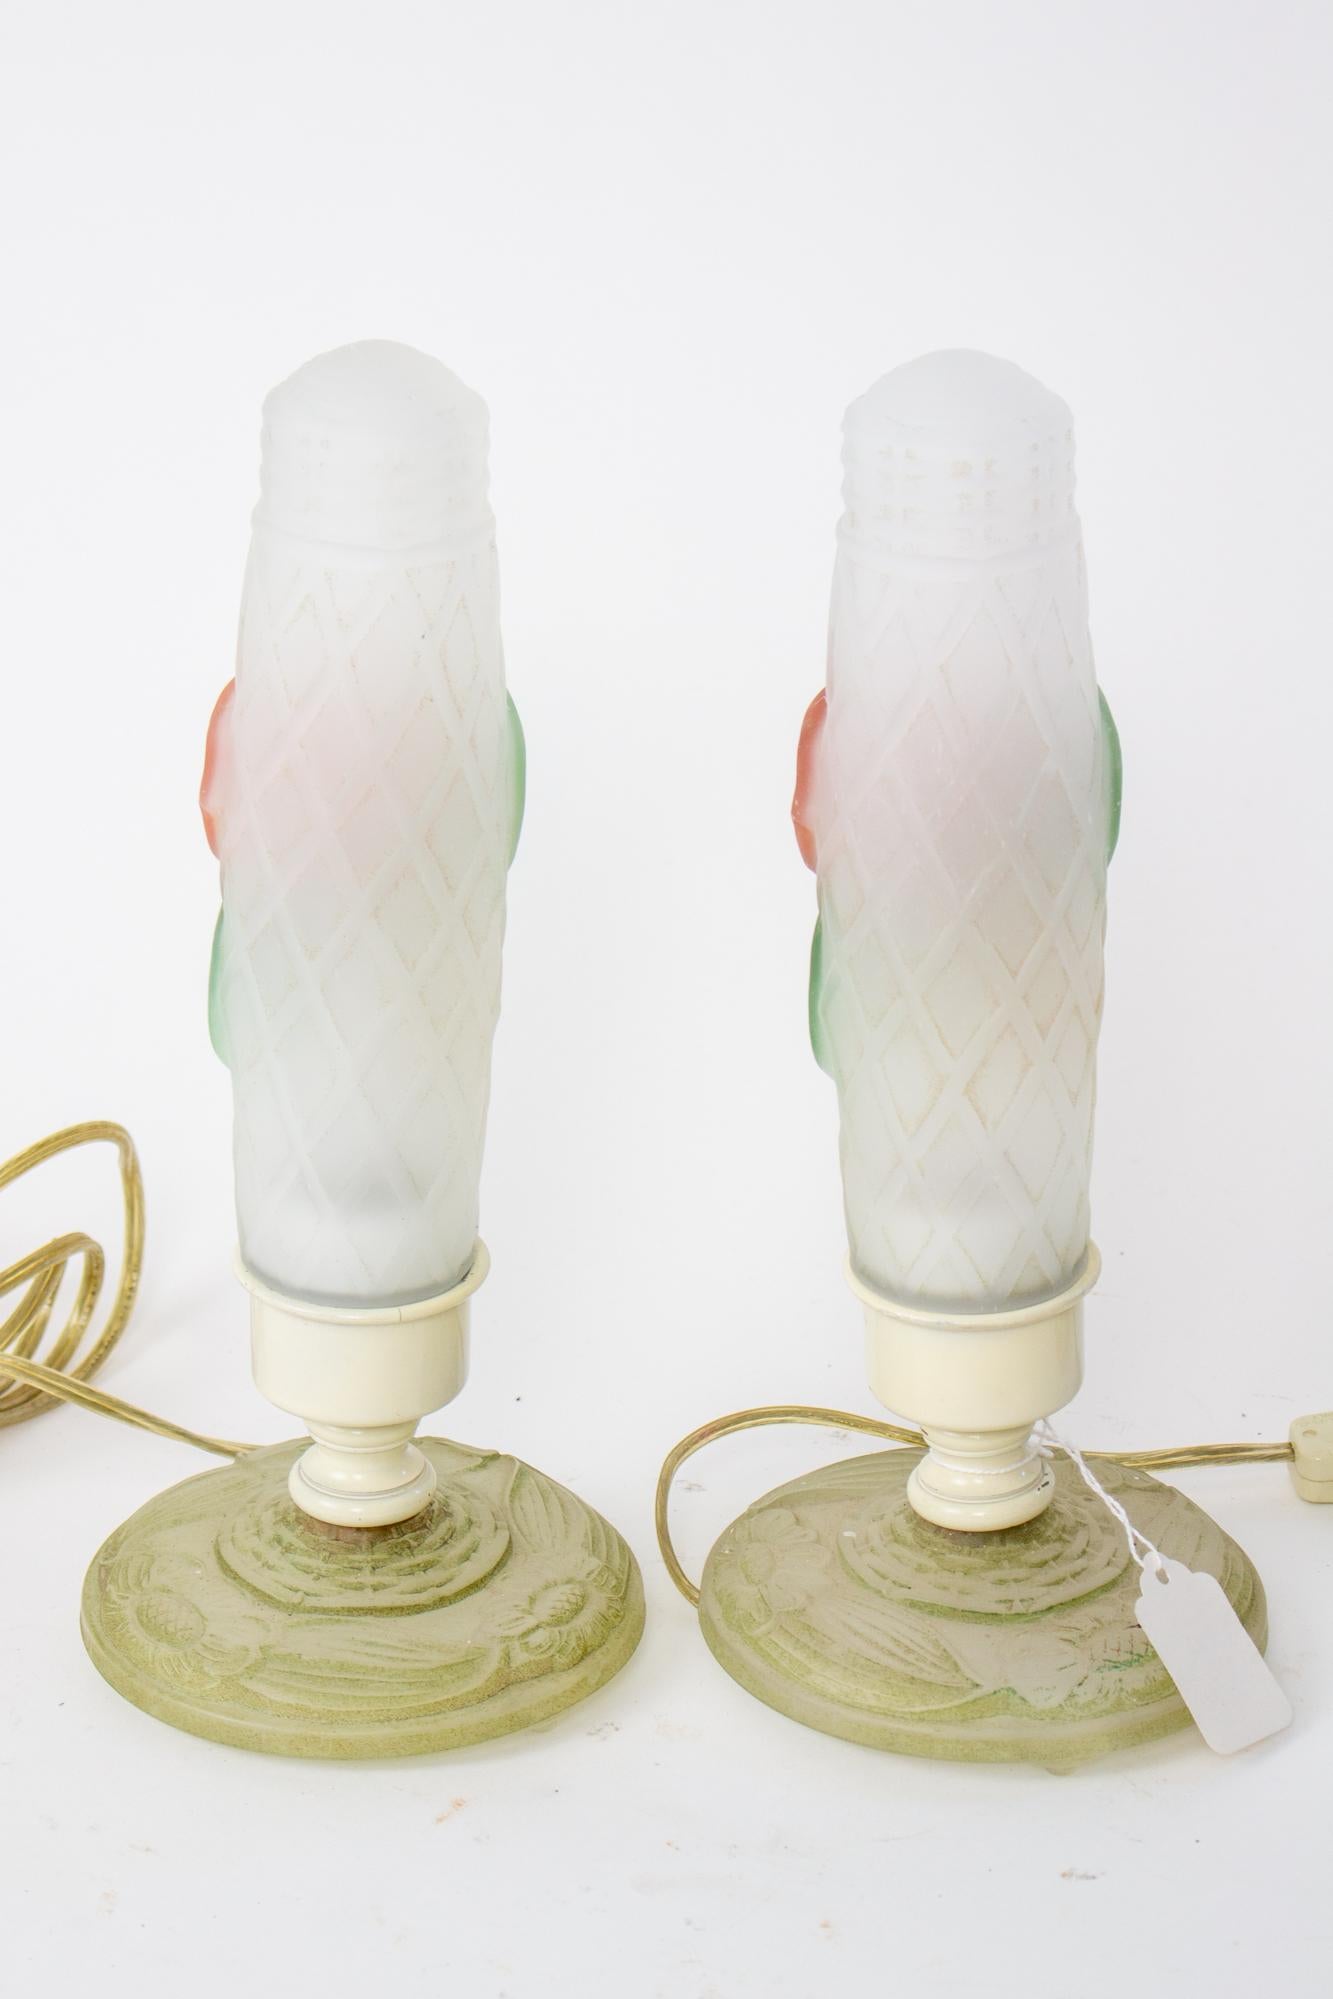 Frosted glass floral boudoir lamps, a Pair. Frosted glass bases and shades. Light bulb is enclosed for soft light. Painted red and yellow flowers. Glass shades have a basketweave texture. Designed to provide soft light on a vanity or boudoir table.